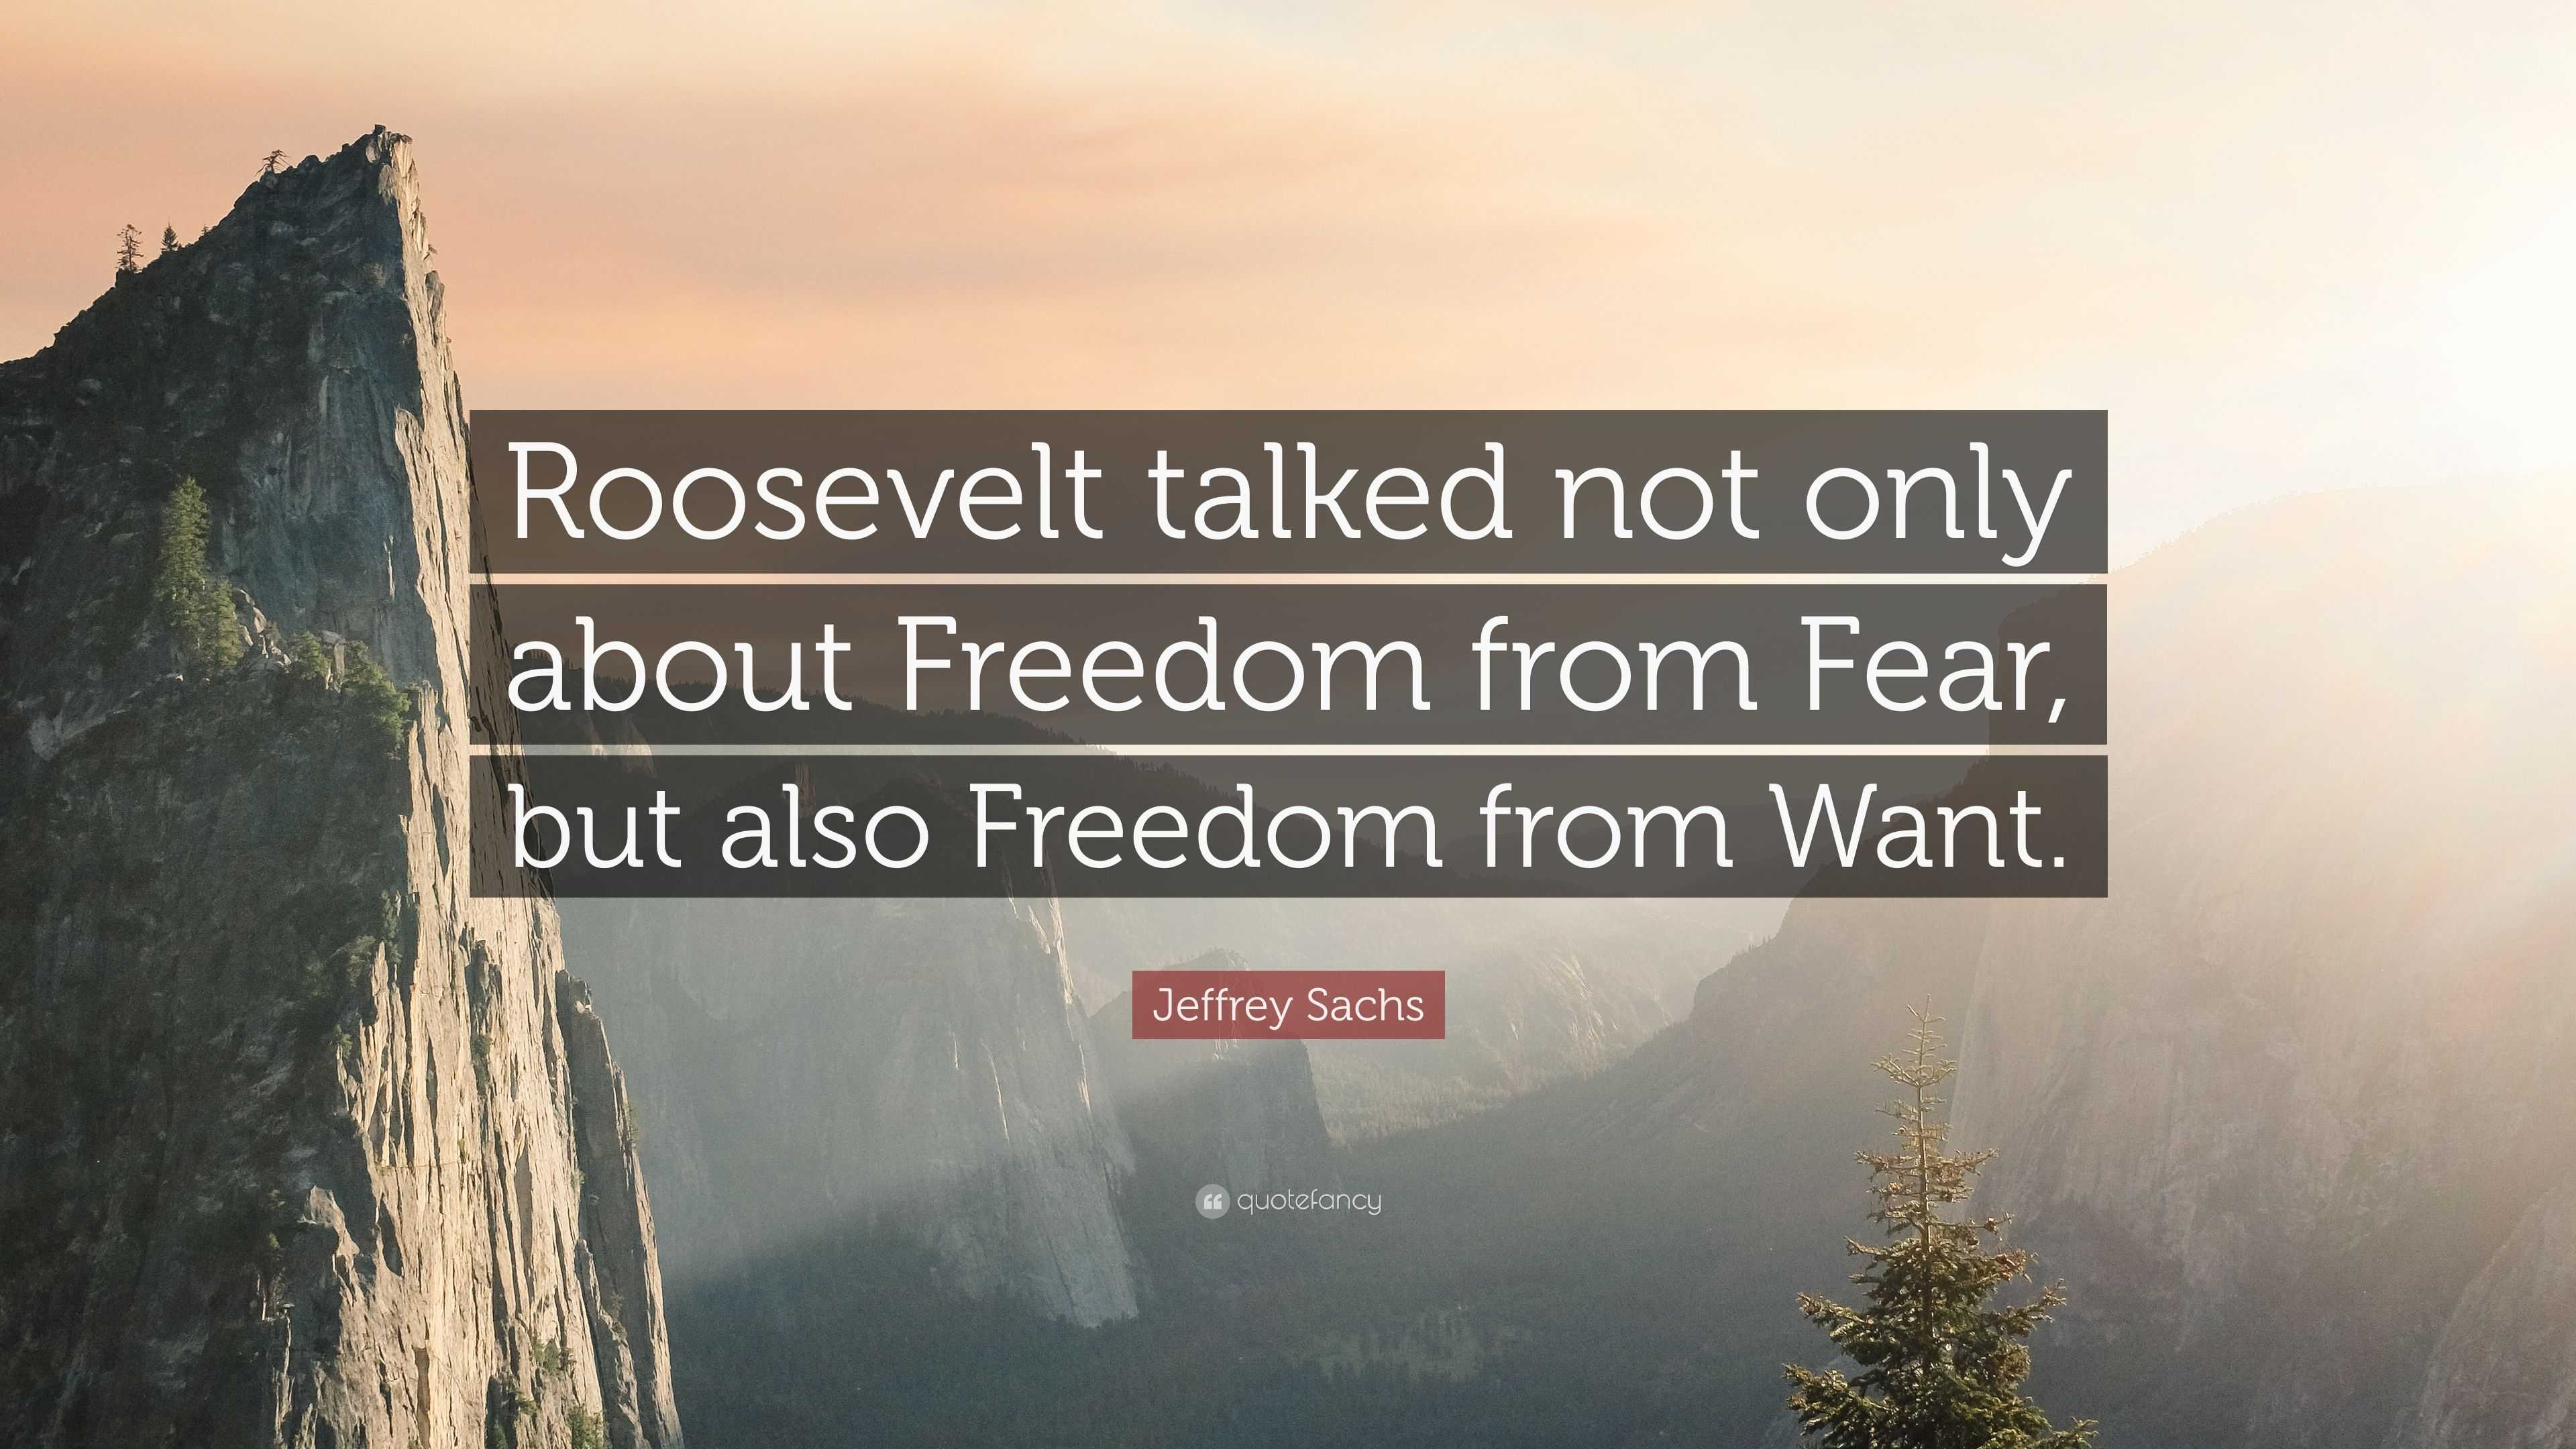 Jeffrey Sachs Quote: “Roosevelt talked not only about Freedom from Fear ...